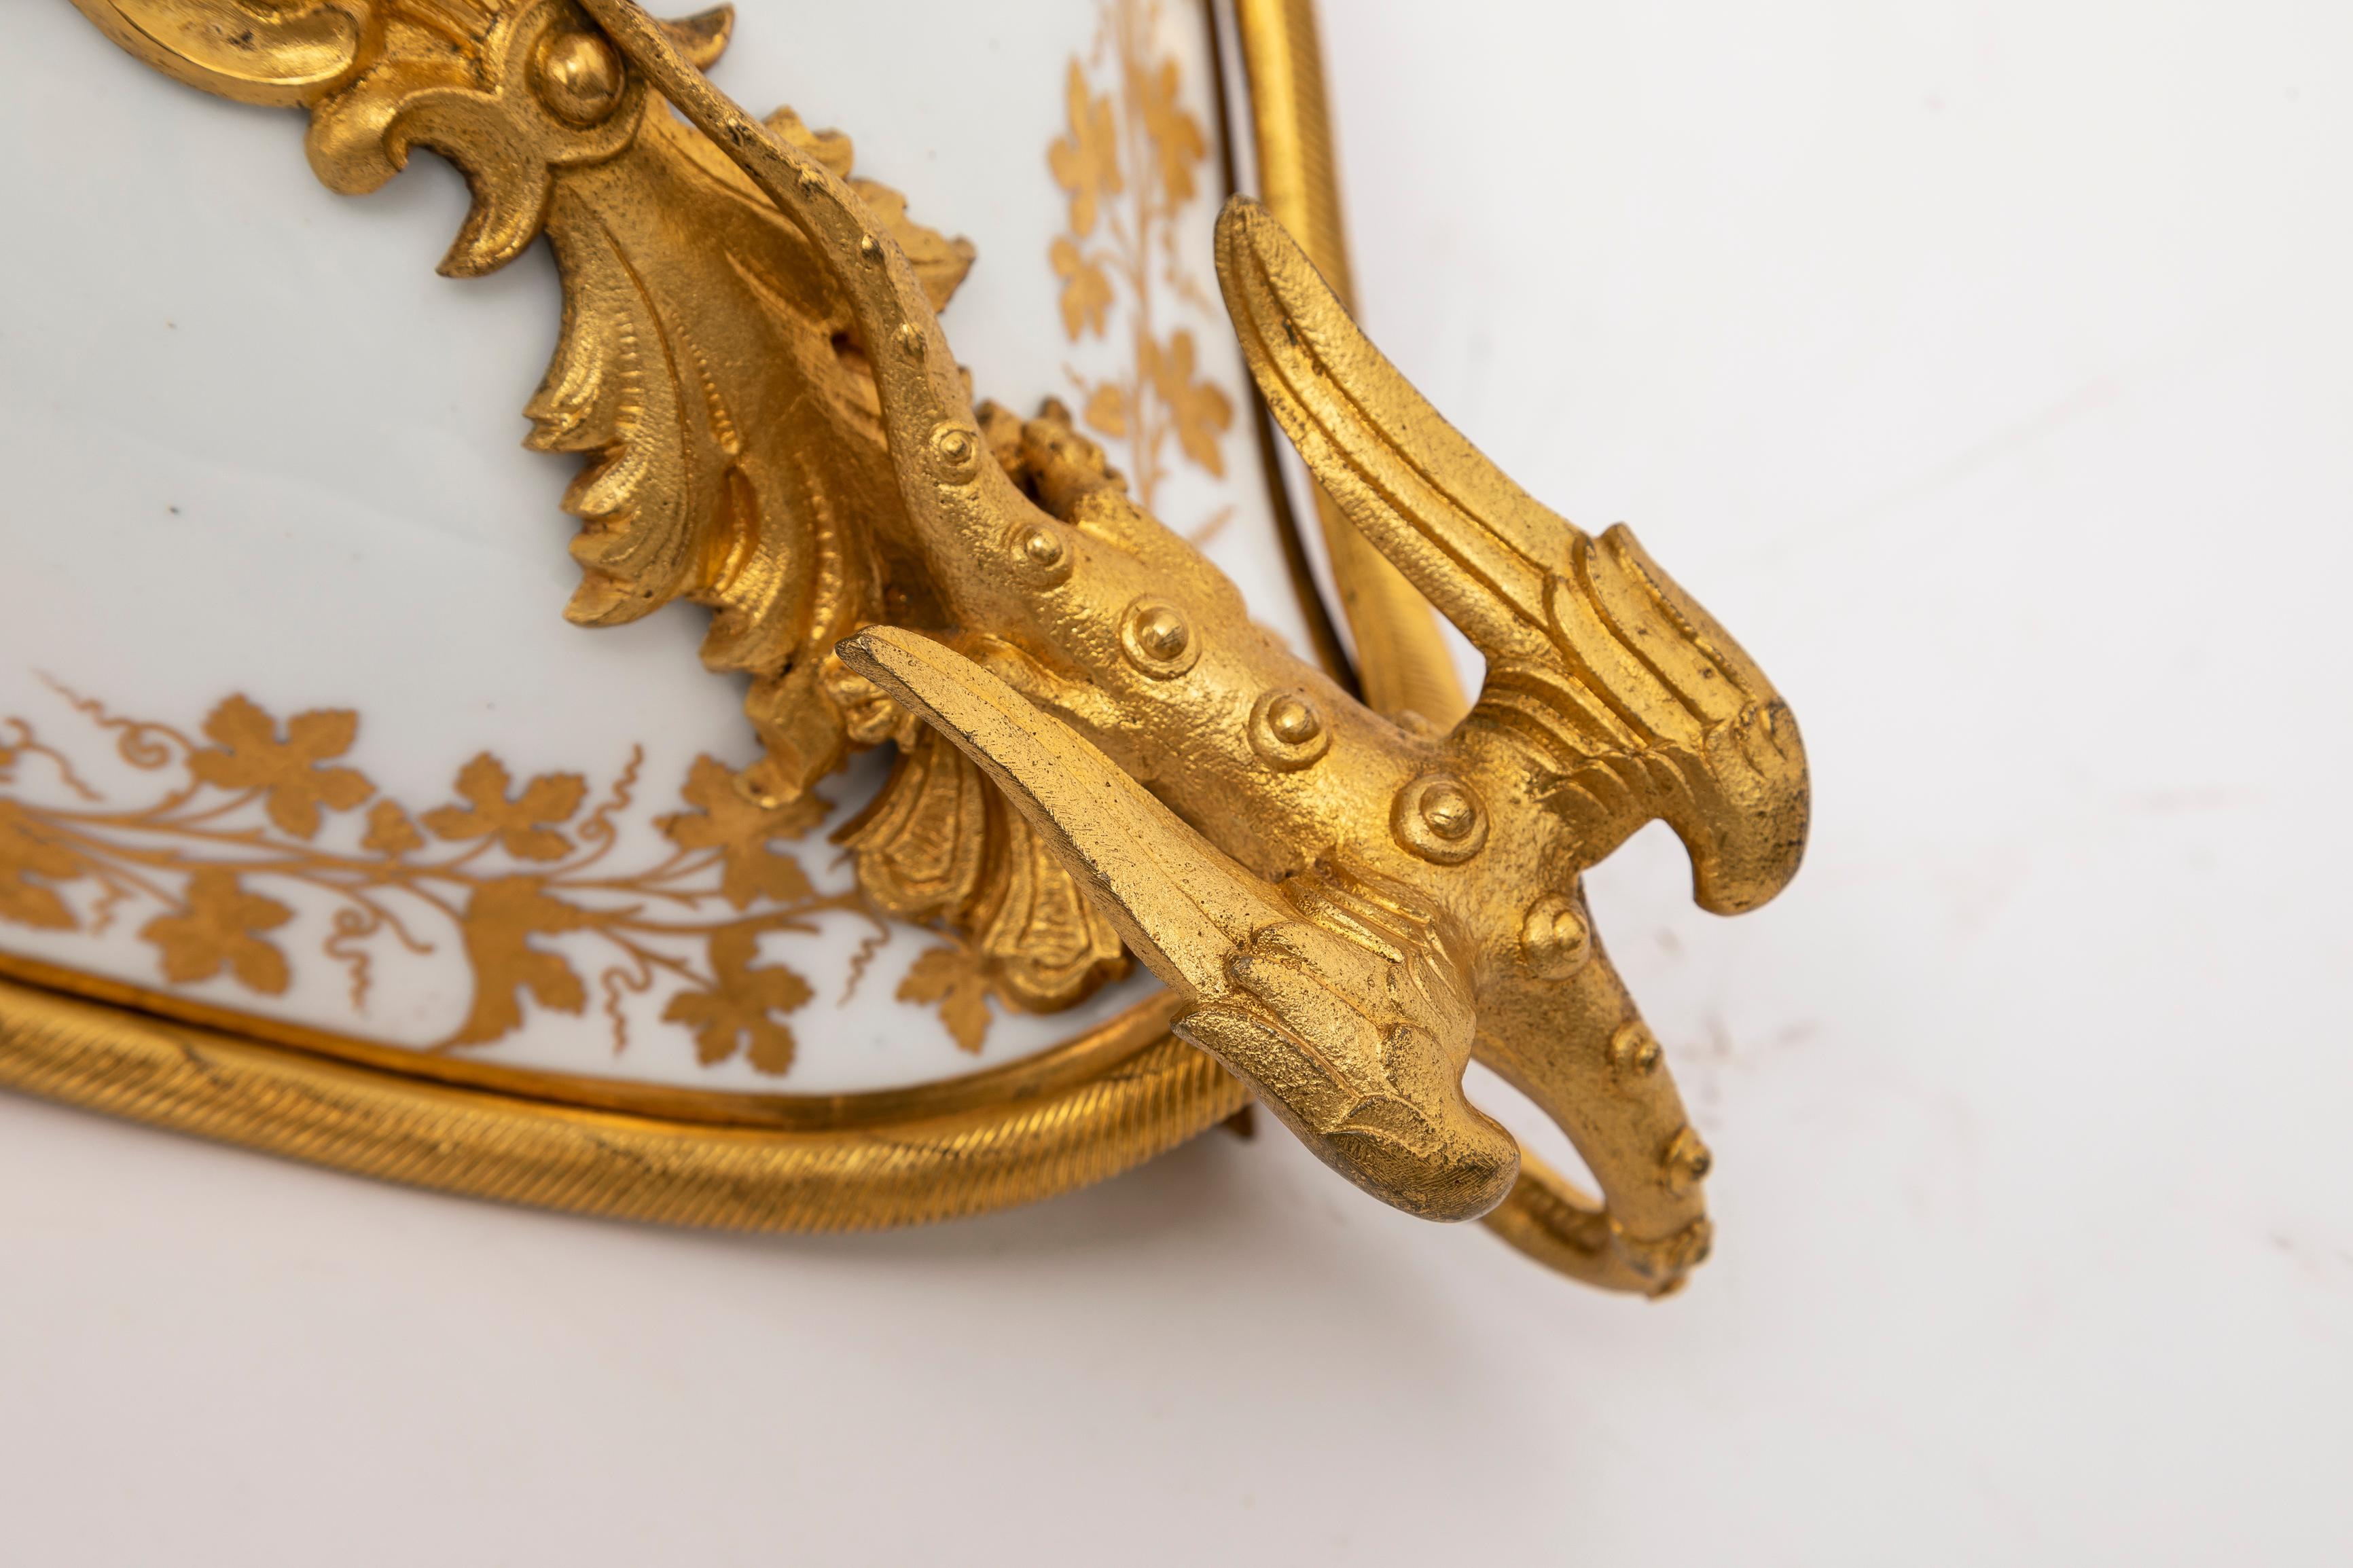 An 18th C. French Ormolu Mounted Sevres Porcelain Centerpiece w/ Dragon Handles For Sale 1